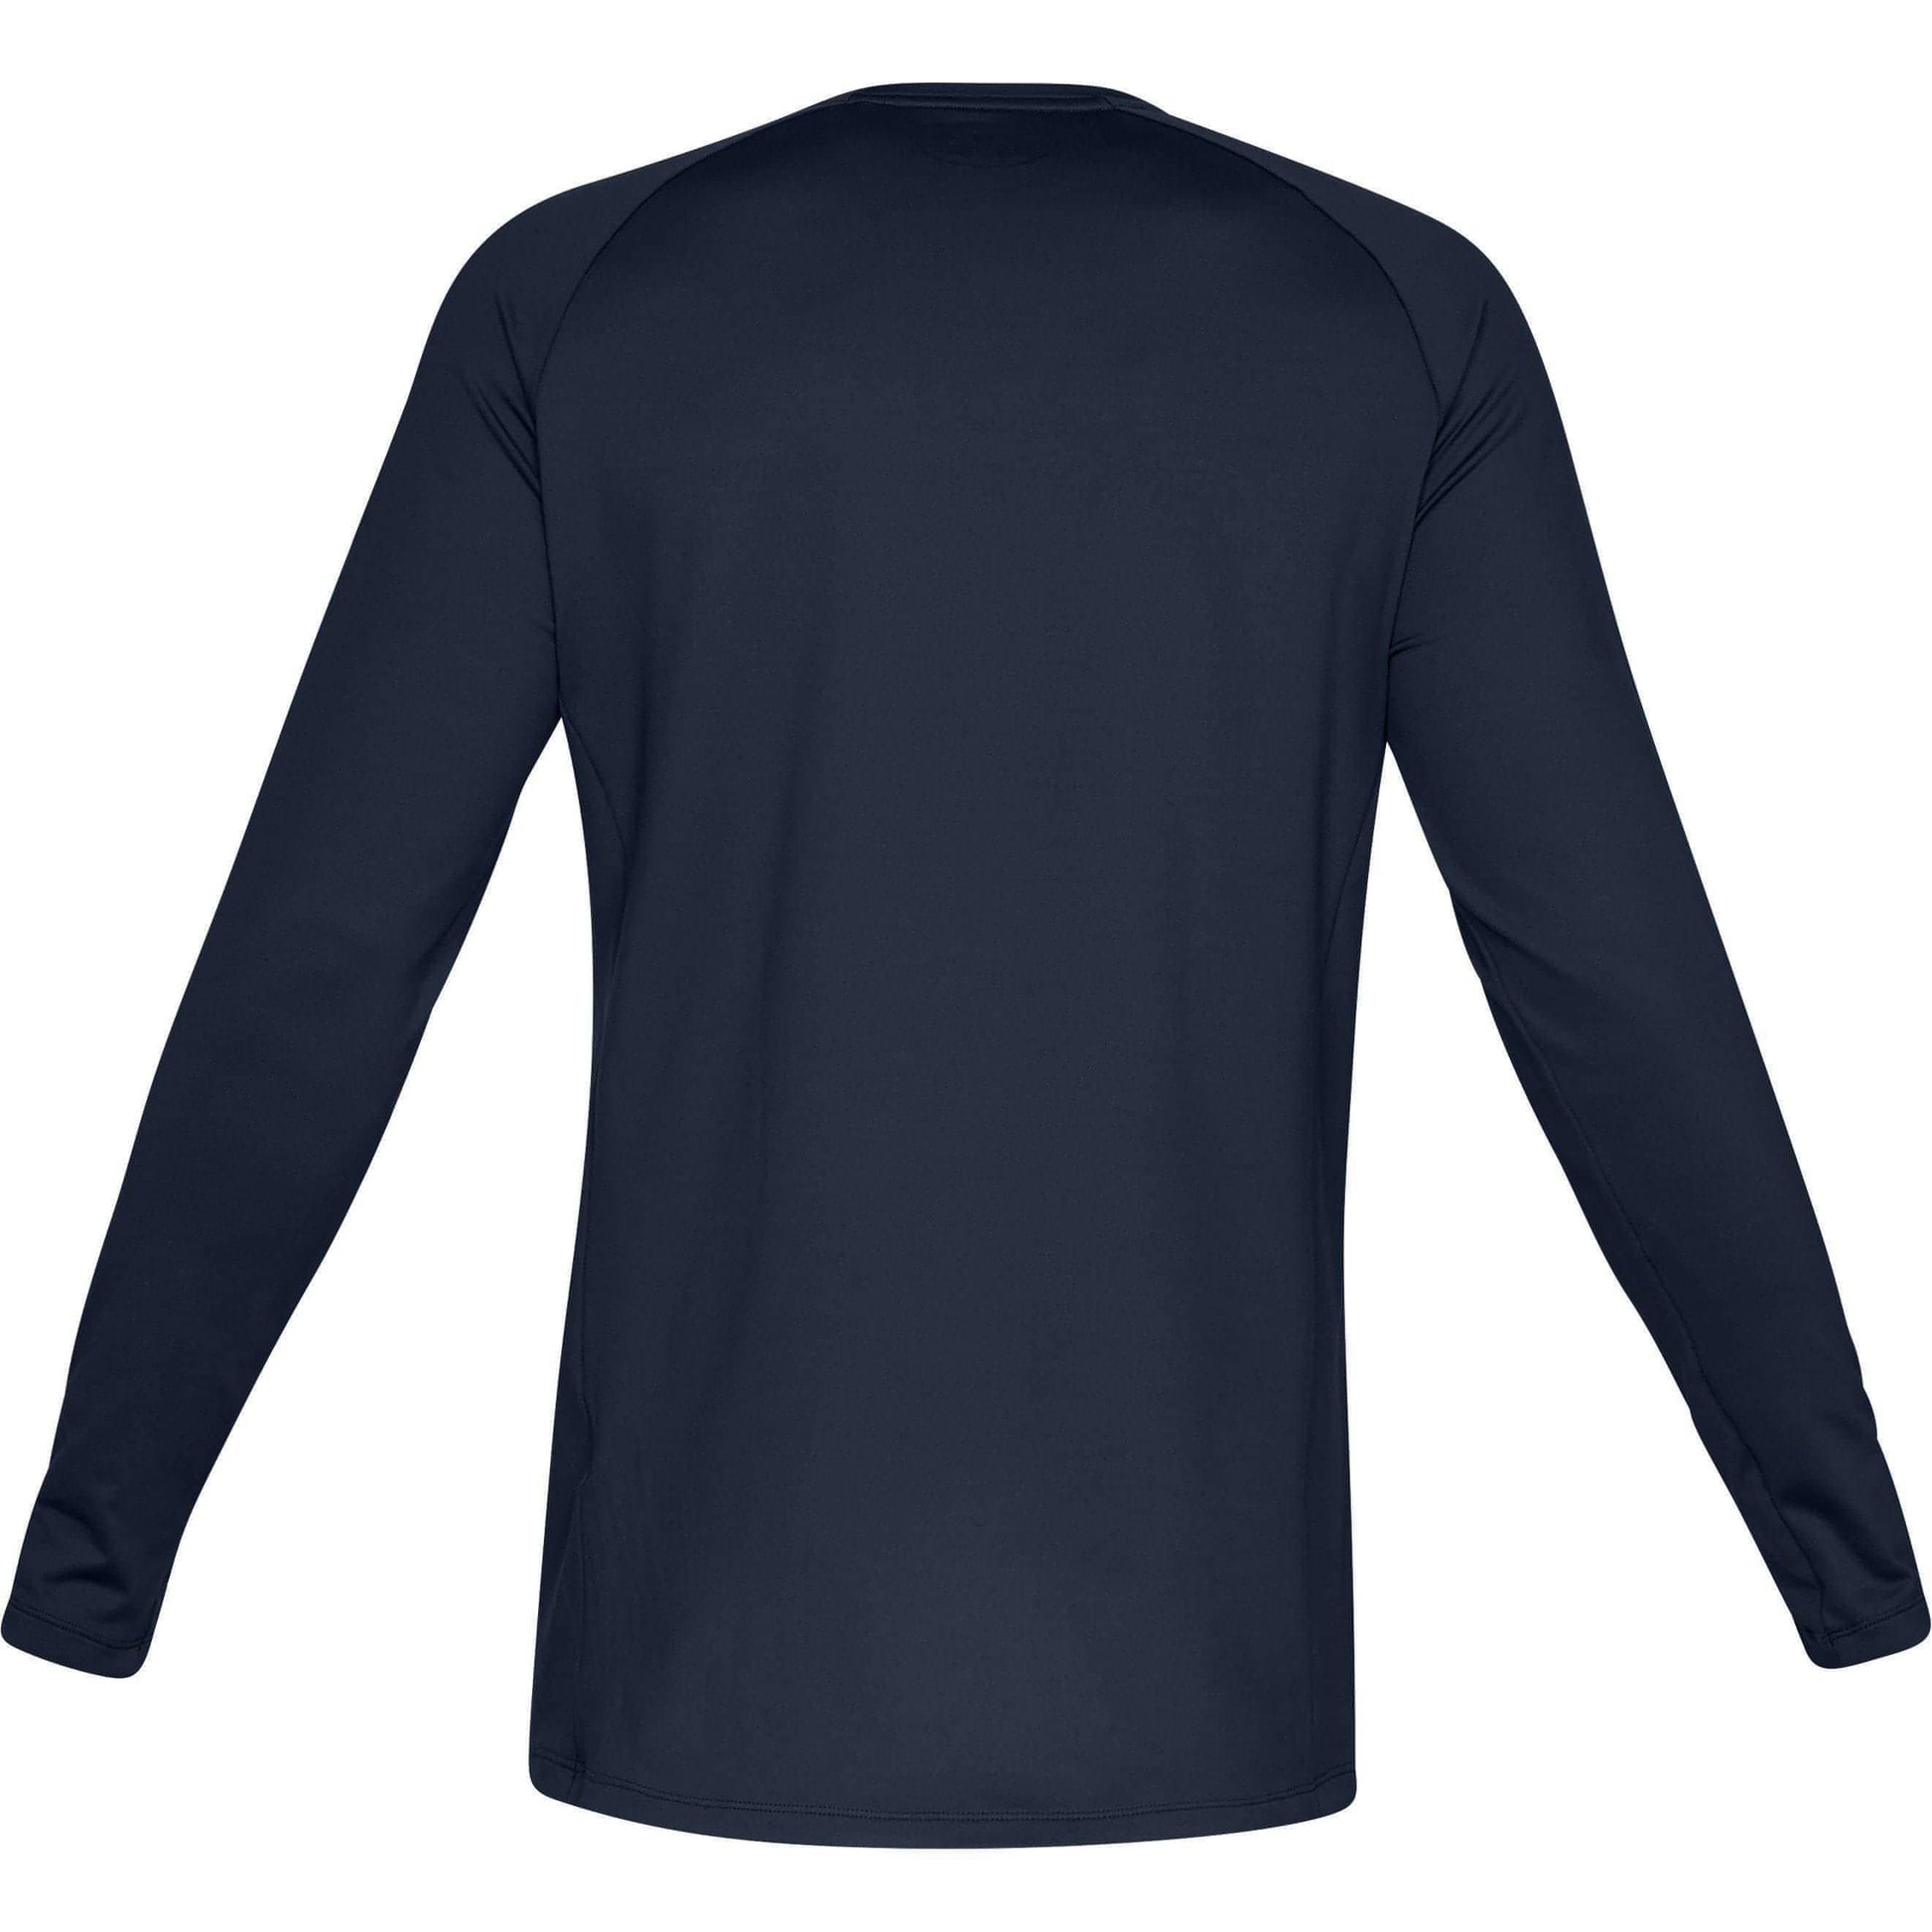 Under Armour Storm Cyclone Long Sleeve Mens Training Top - Navy - Start Fitness